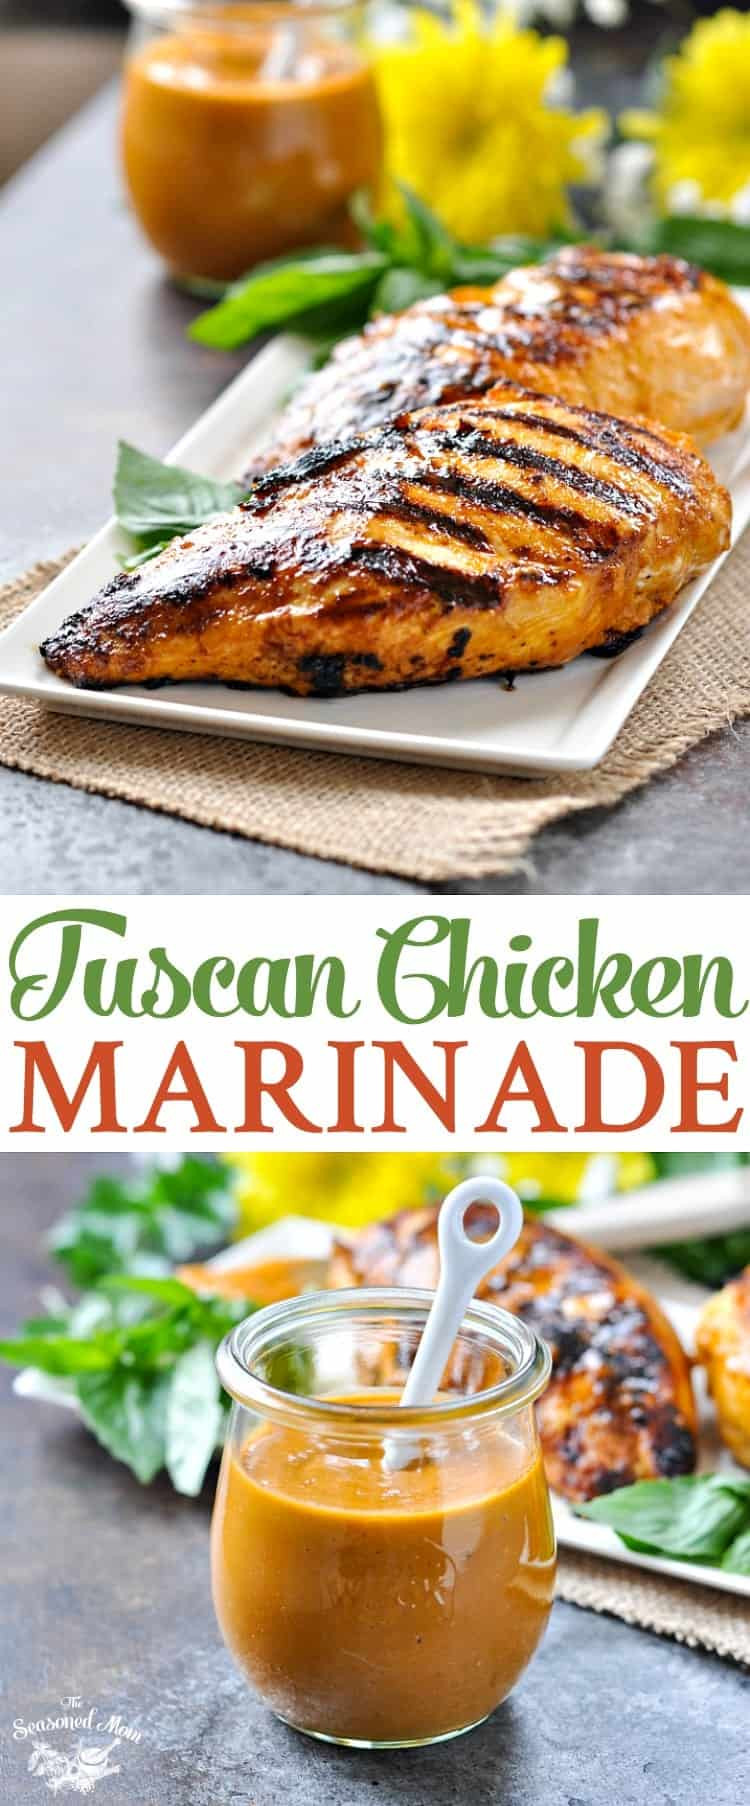 Chicken Sauces And Marinades
 5 Minute Tuscan Chicken Marinade The Seasoned Mom